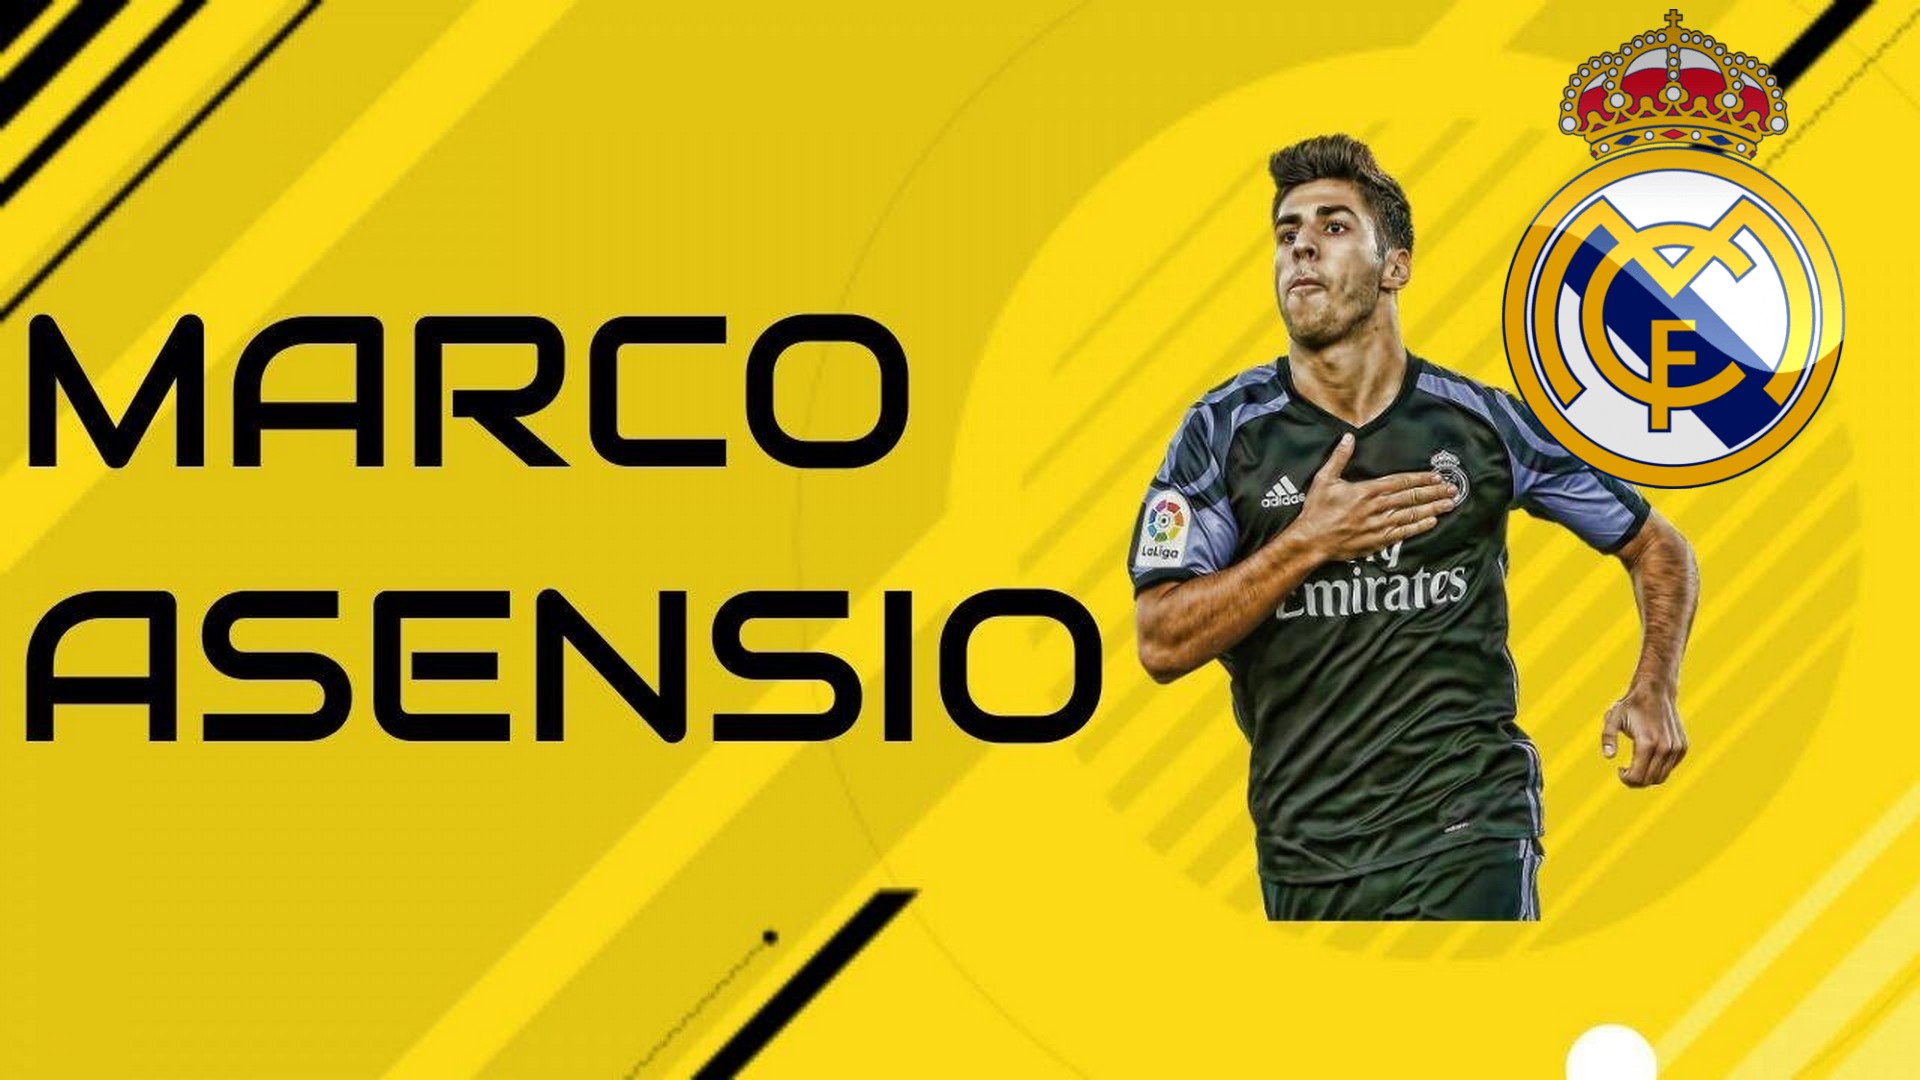 Wallpapers HD Marco Asensio Real Madrid with resolution 1920x1080 pixel. You can make this wallpaper for your Mac or Windows Desktop Background, iPhone, Android or Tablet and another Smartphone device